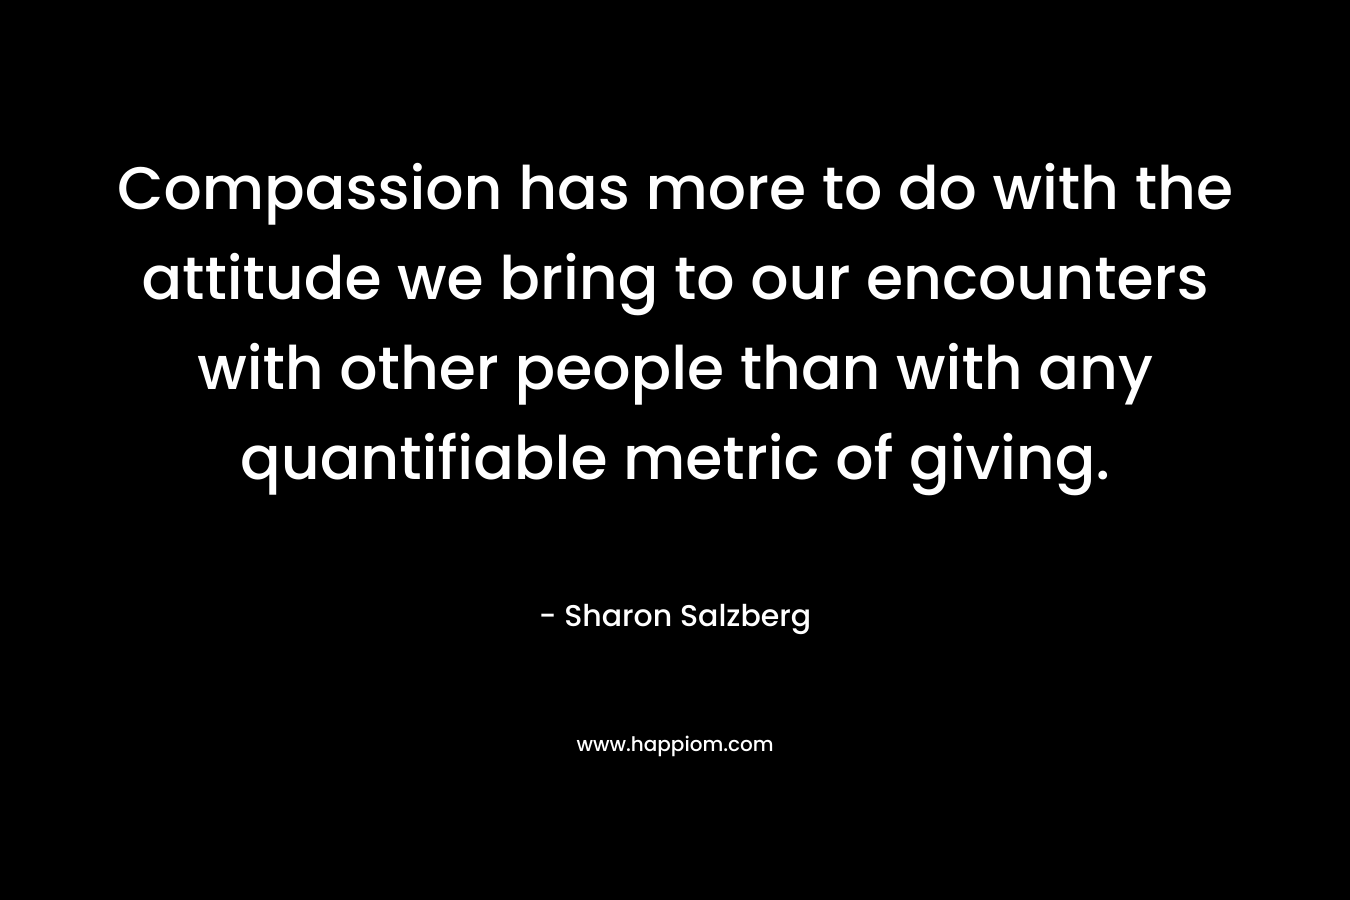 Compassion has more to do with the attitude we bring to our encounters with other people than with any quantifiable metric of giving.